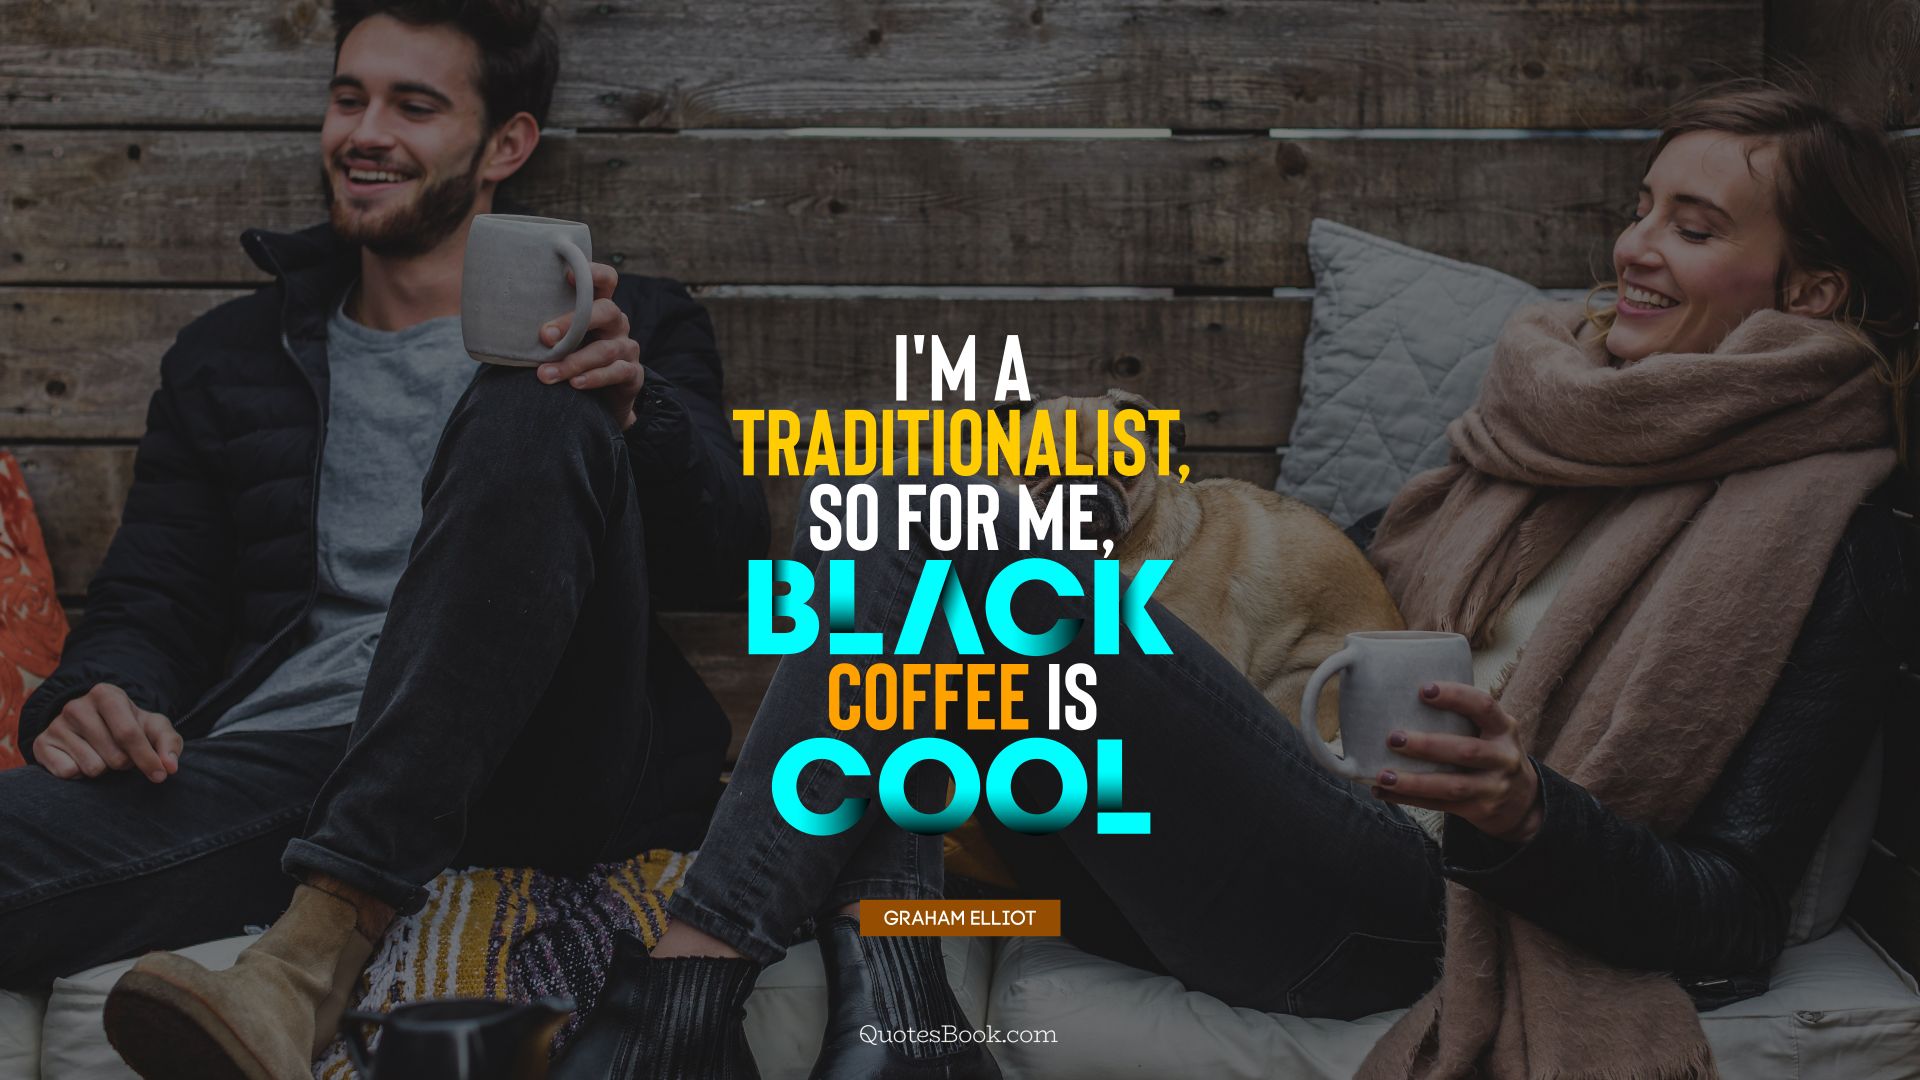 I'm a traditionalist, so for me, black coffee is cool. - Quote by Graham Elliot